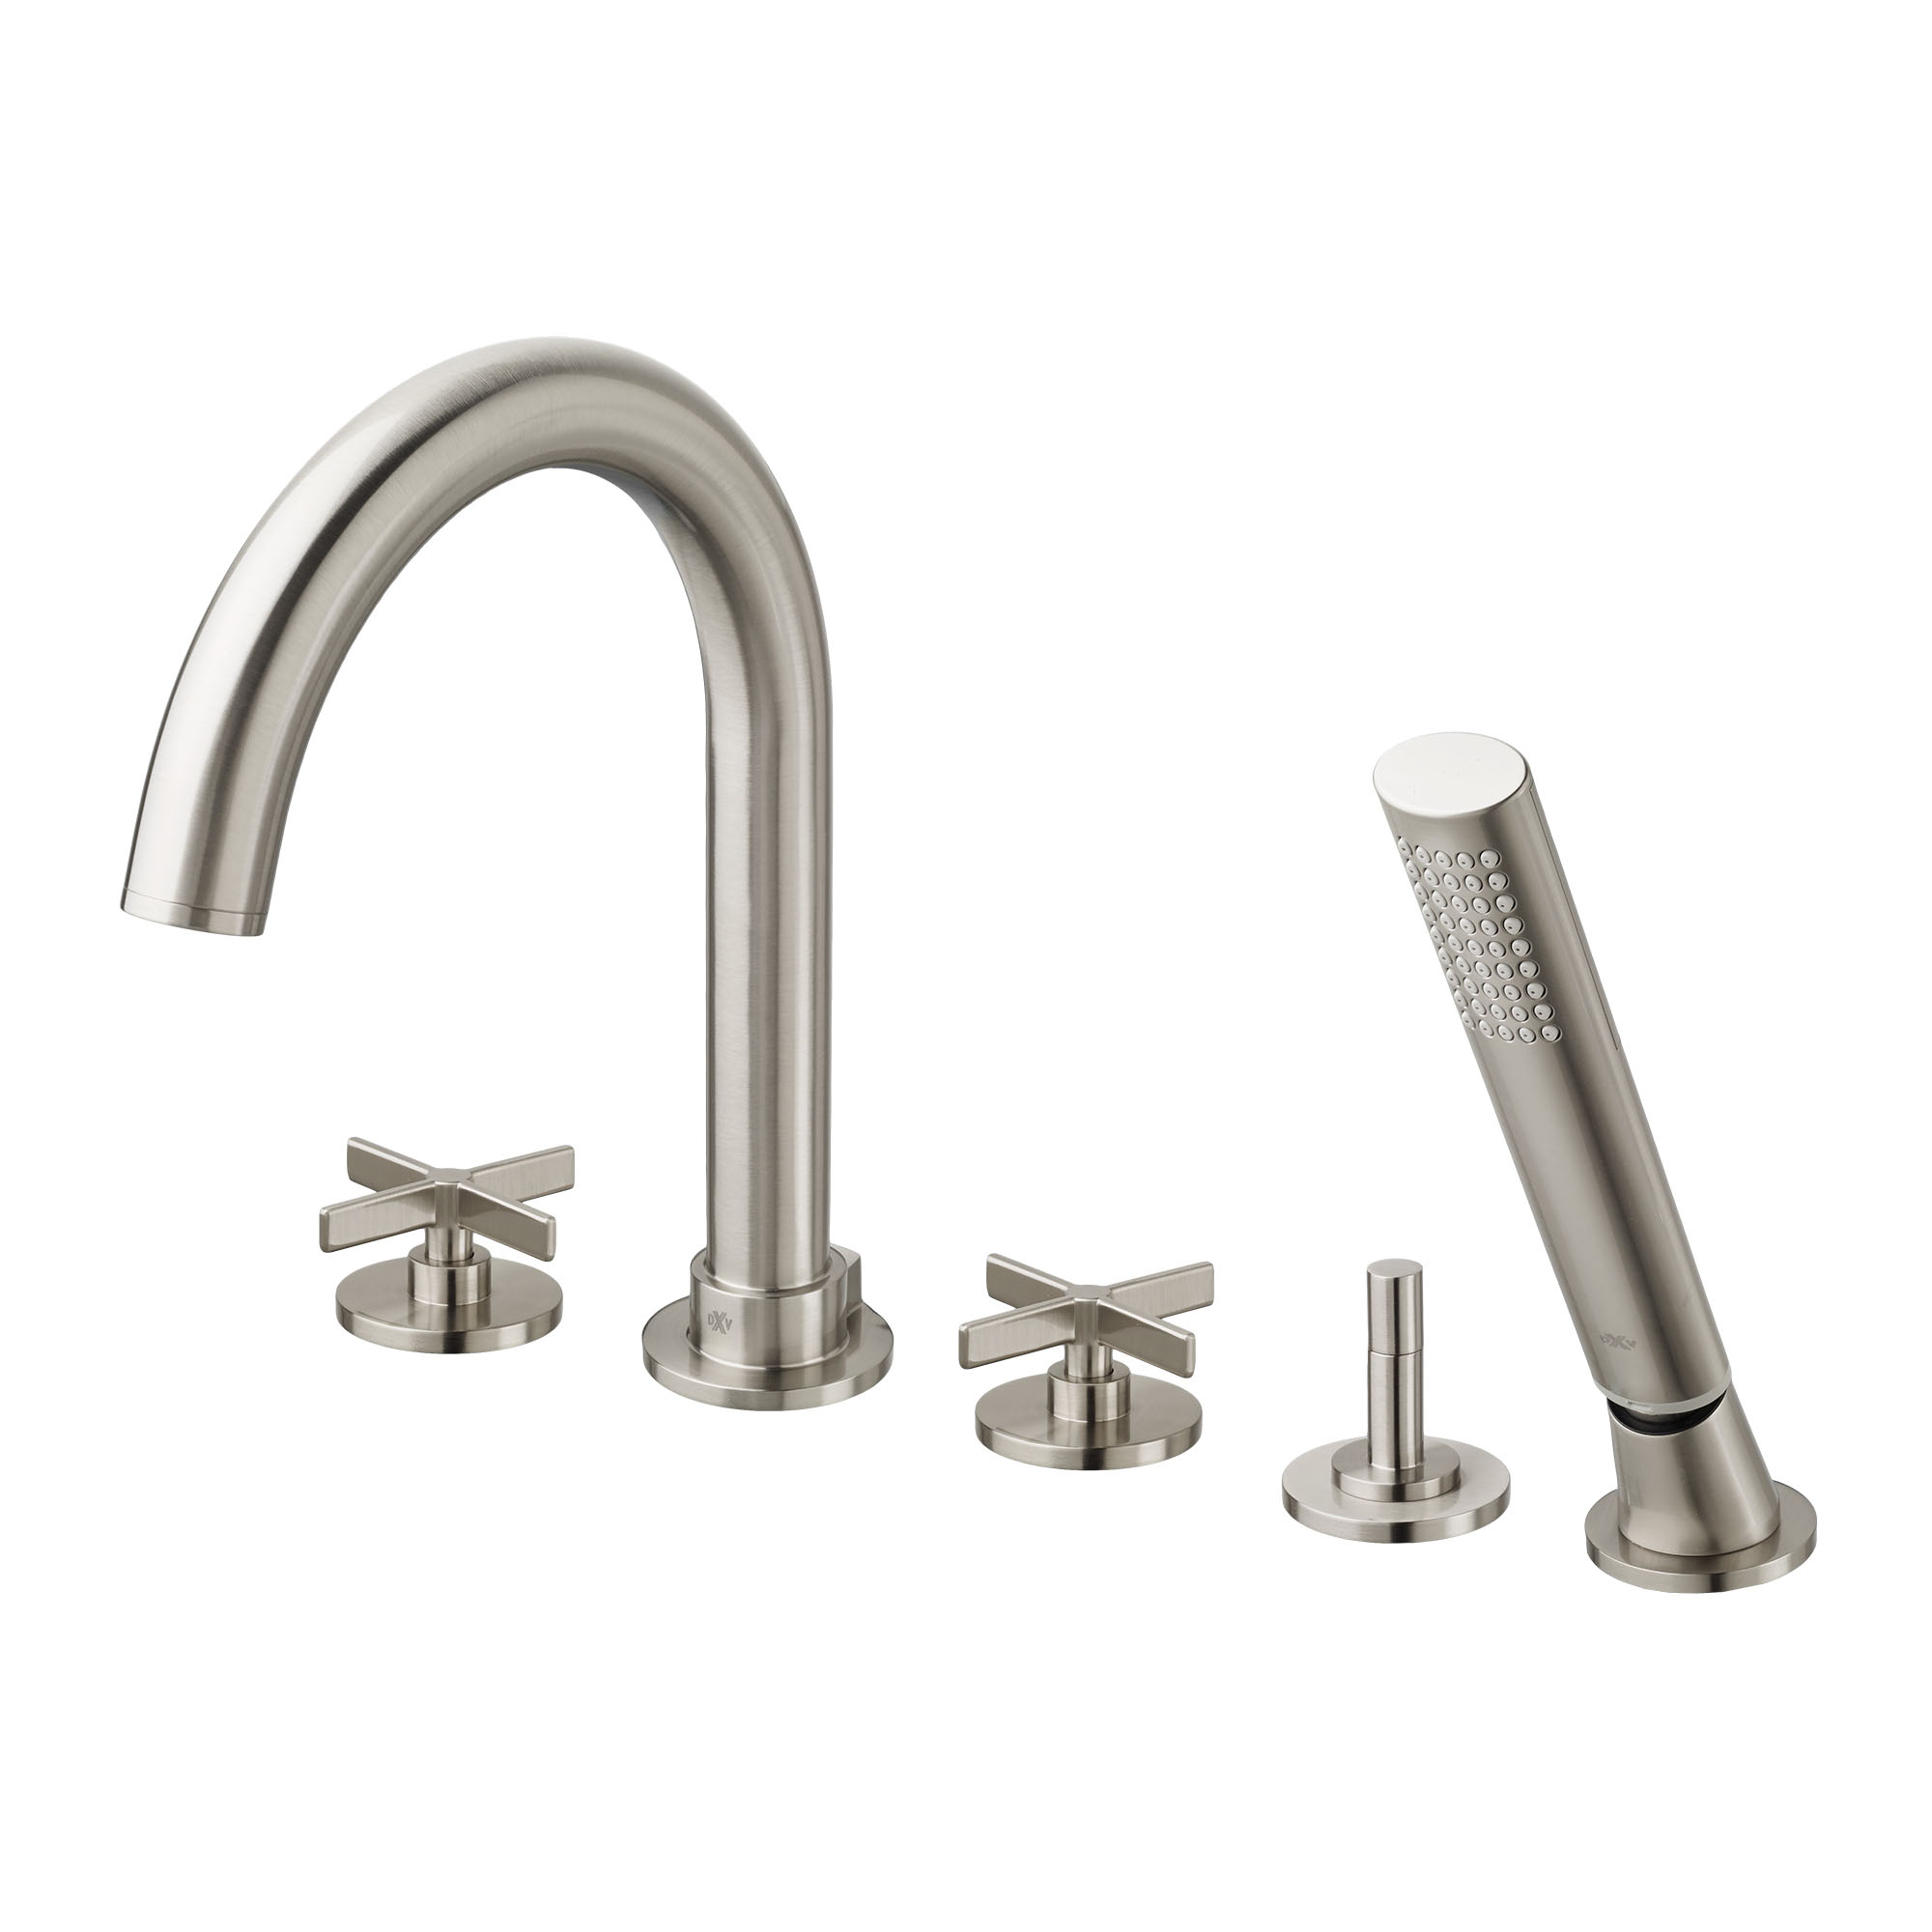 Percy 2-Handle Deck Mount Bathtub Faucet with Hand Shower and Cross Handles